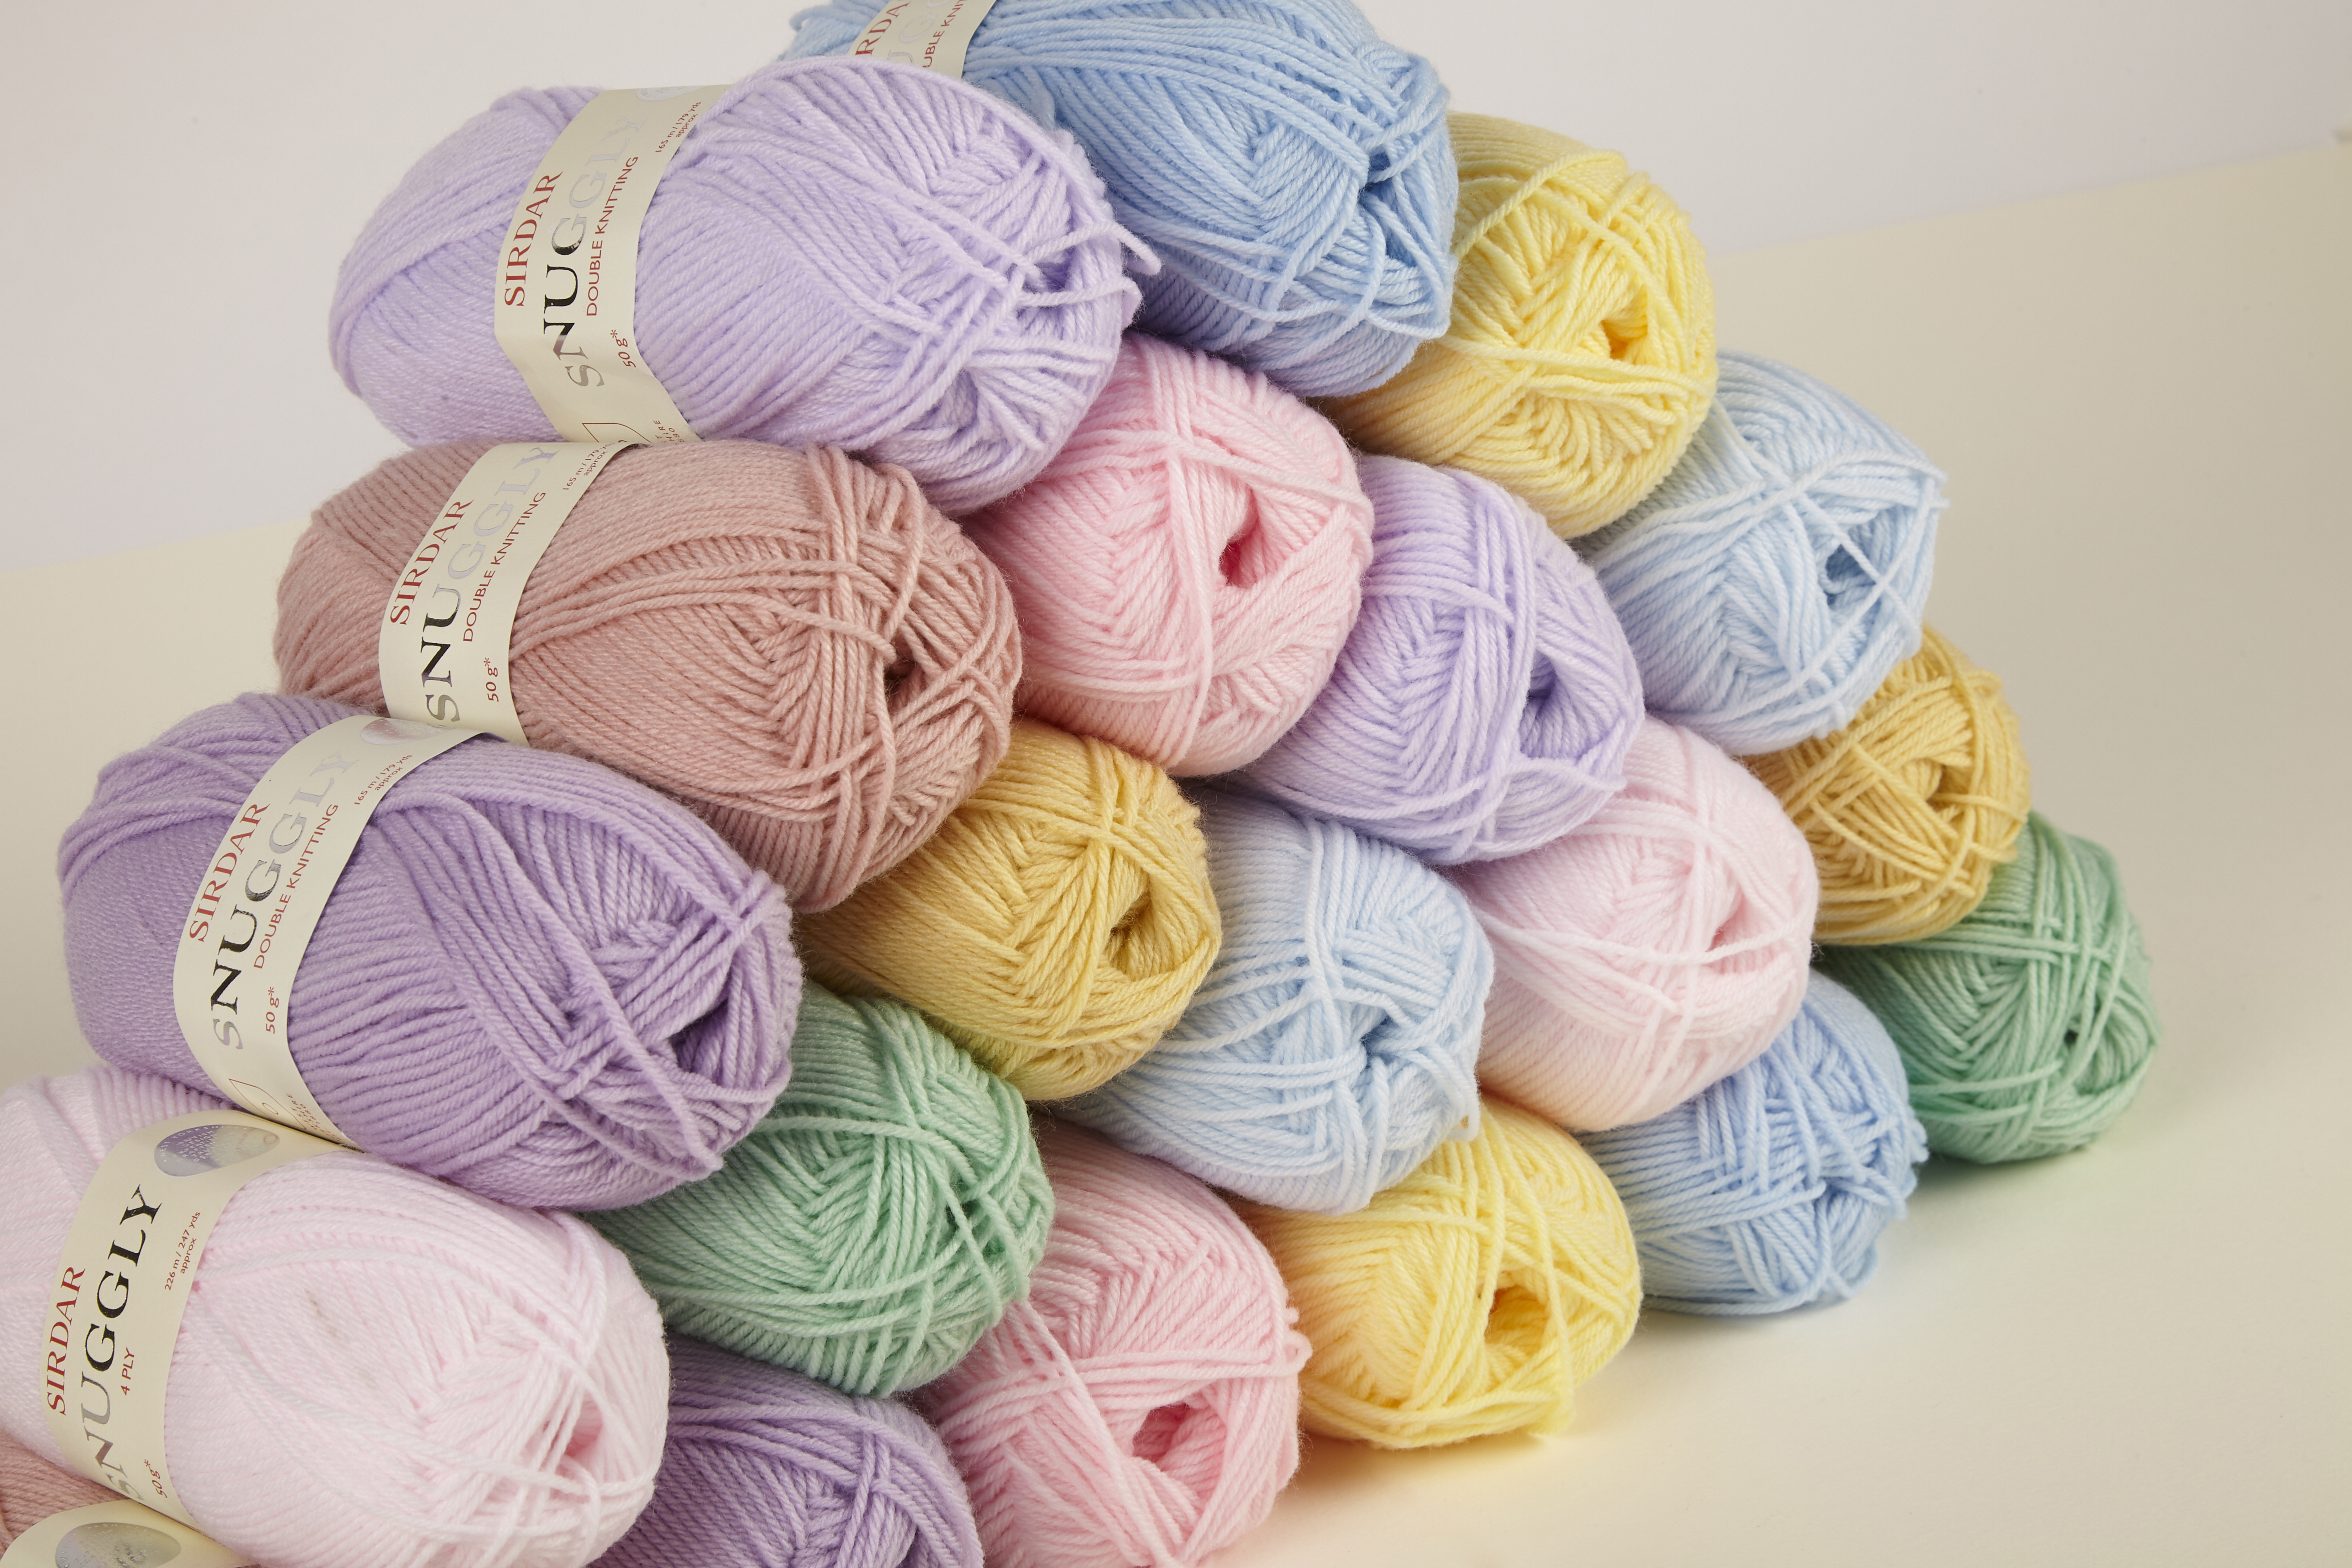 YARN, Why are you so obsessed with us?